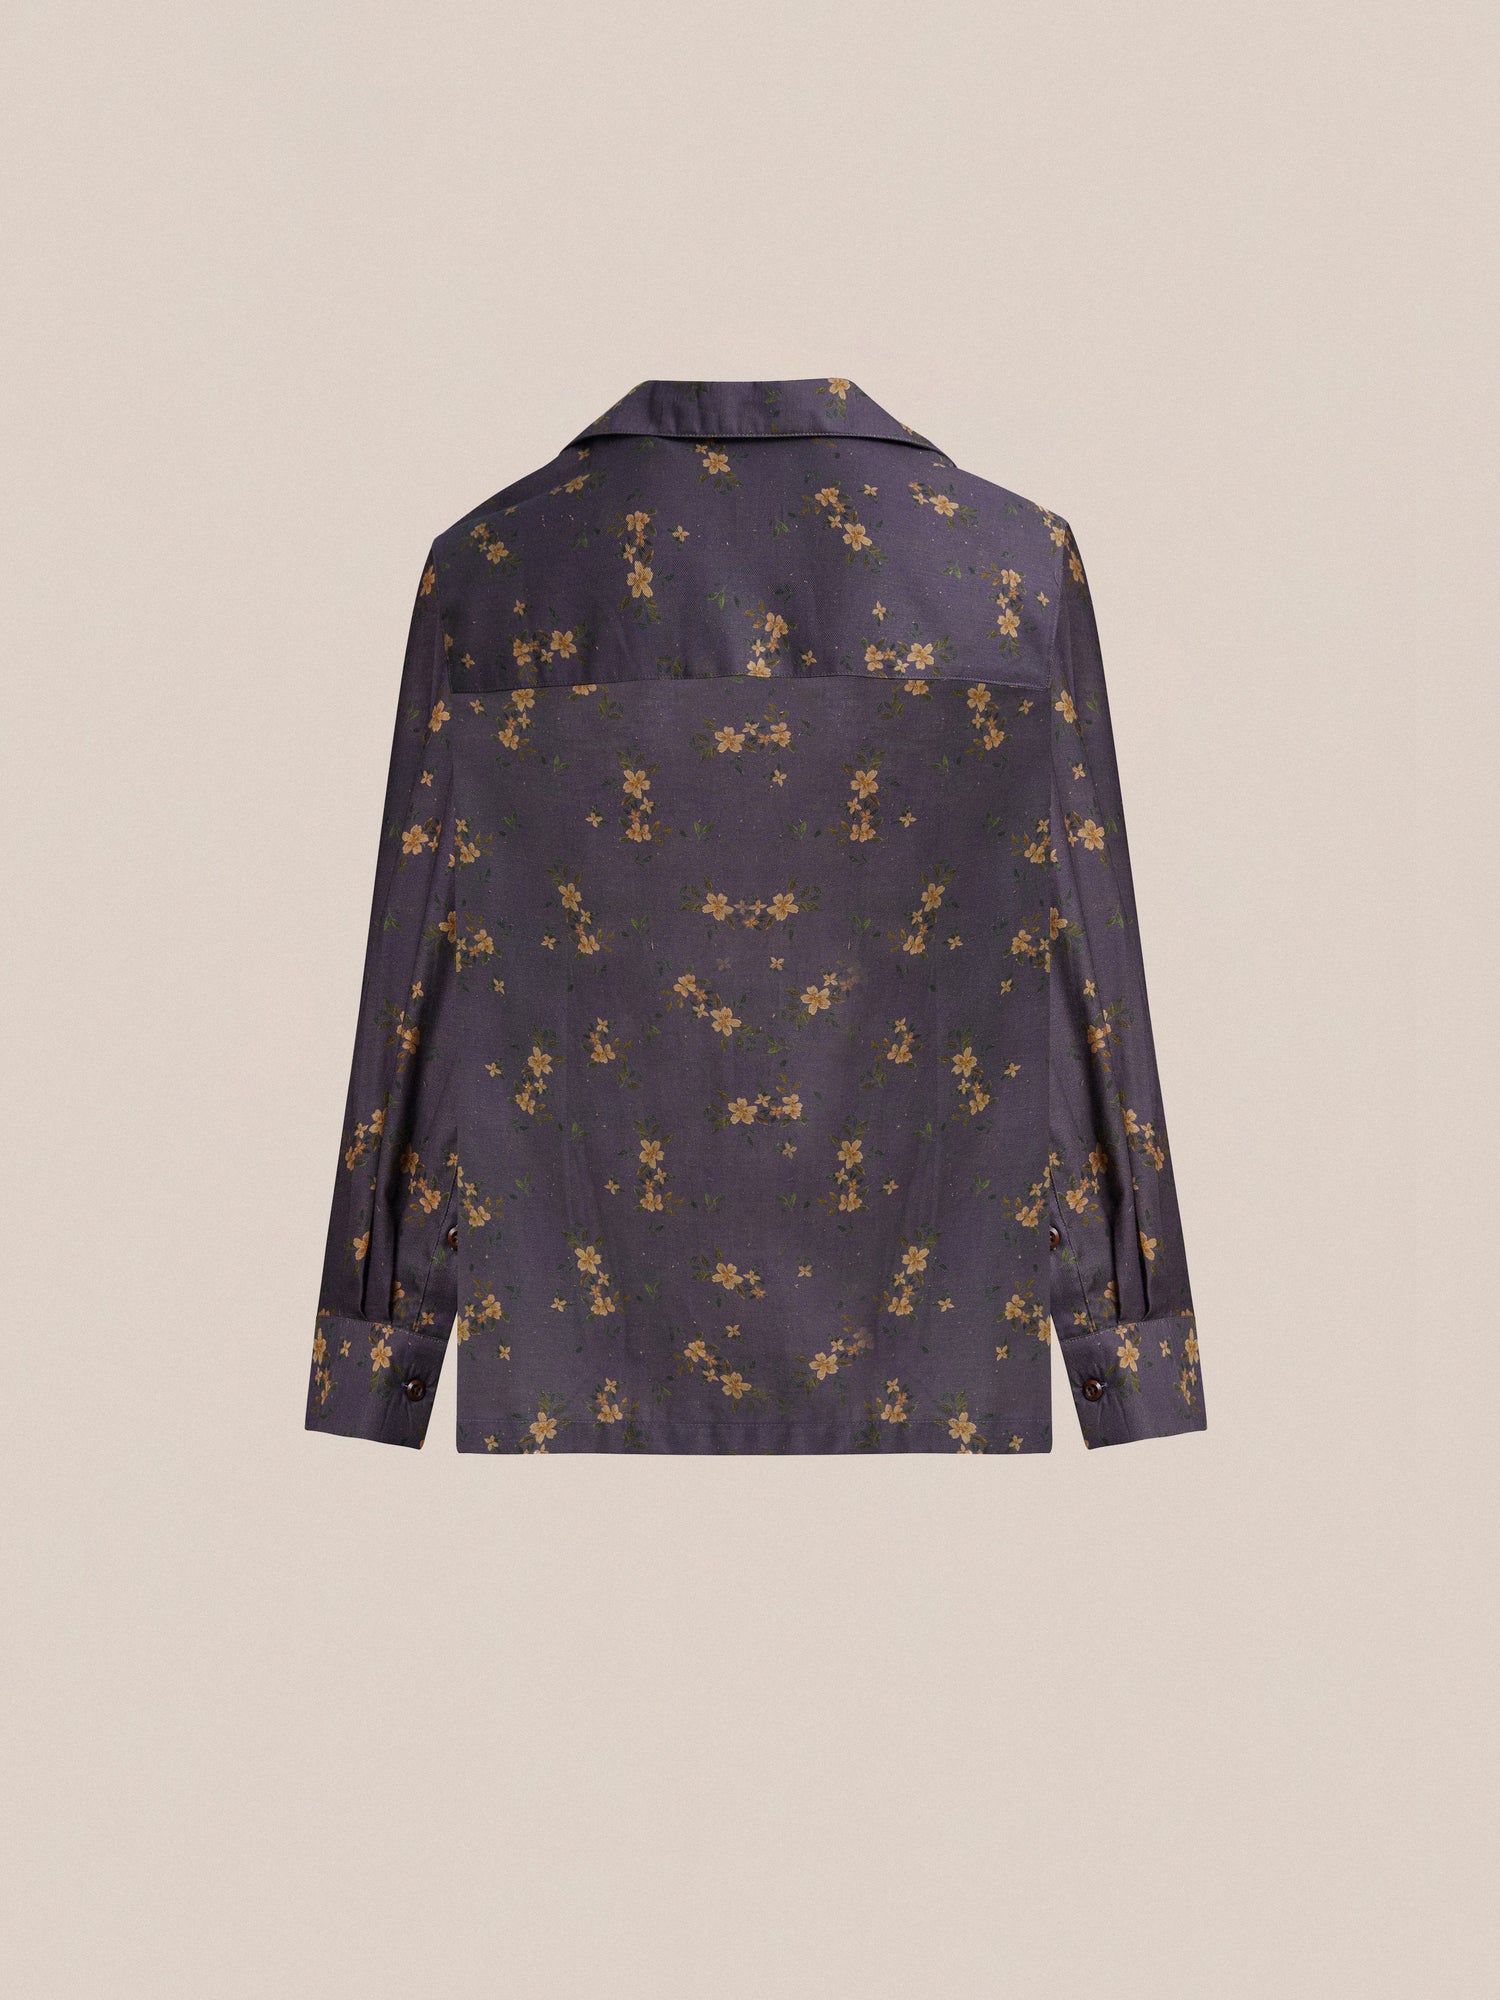 The back of a Found Dusty LS Camp Shirt with a floral print on it, exuding classic appeal.